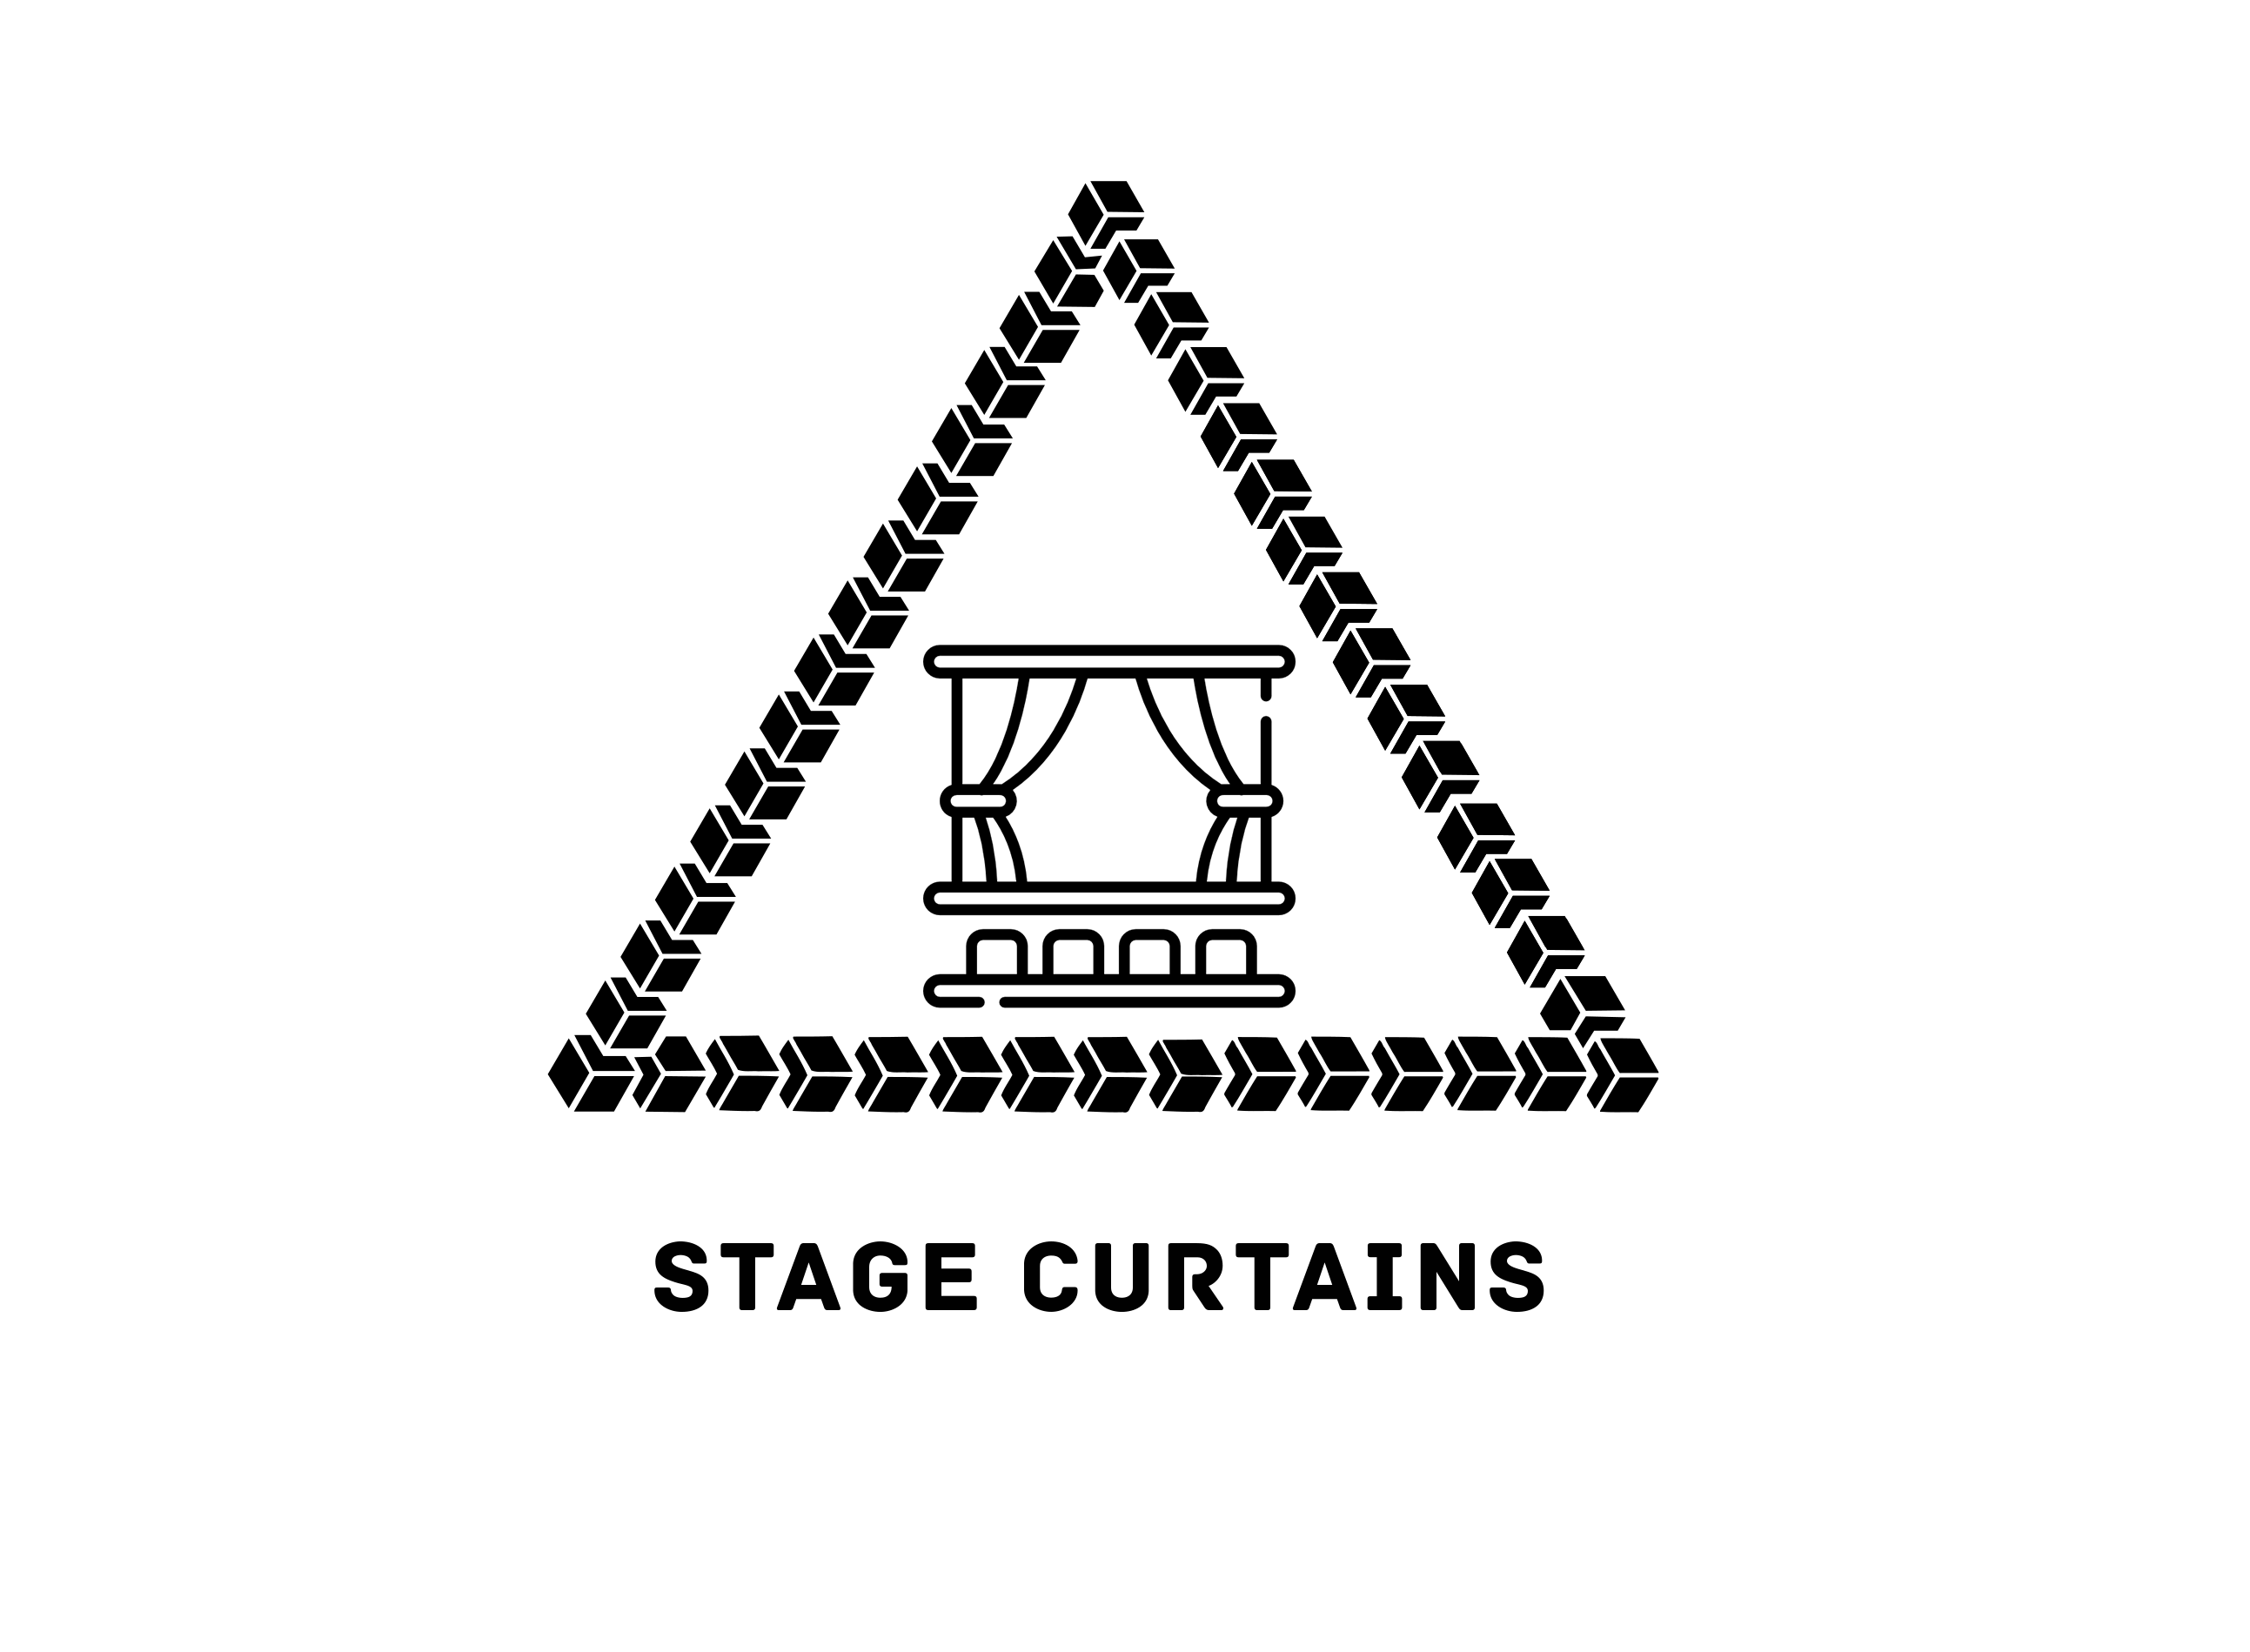 STAGE CURTAINS